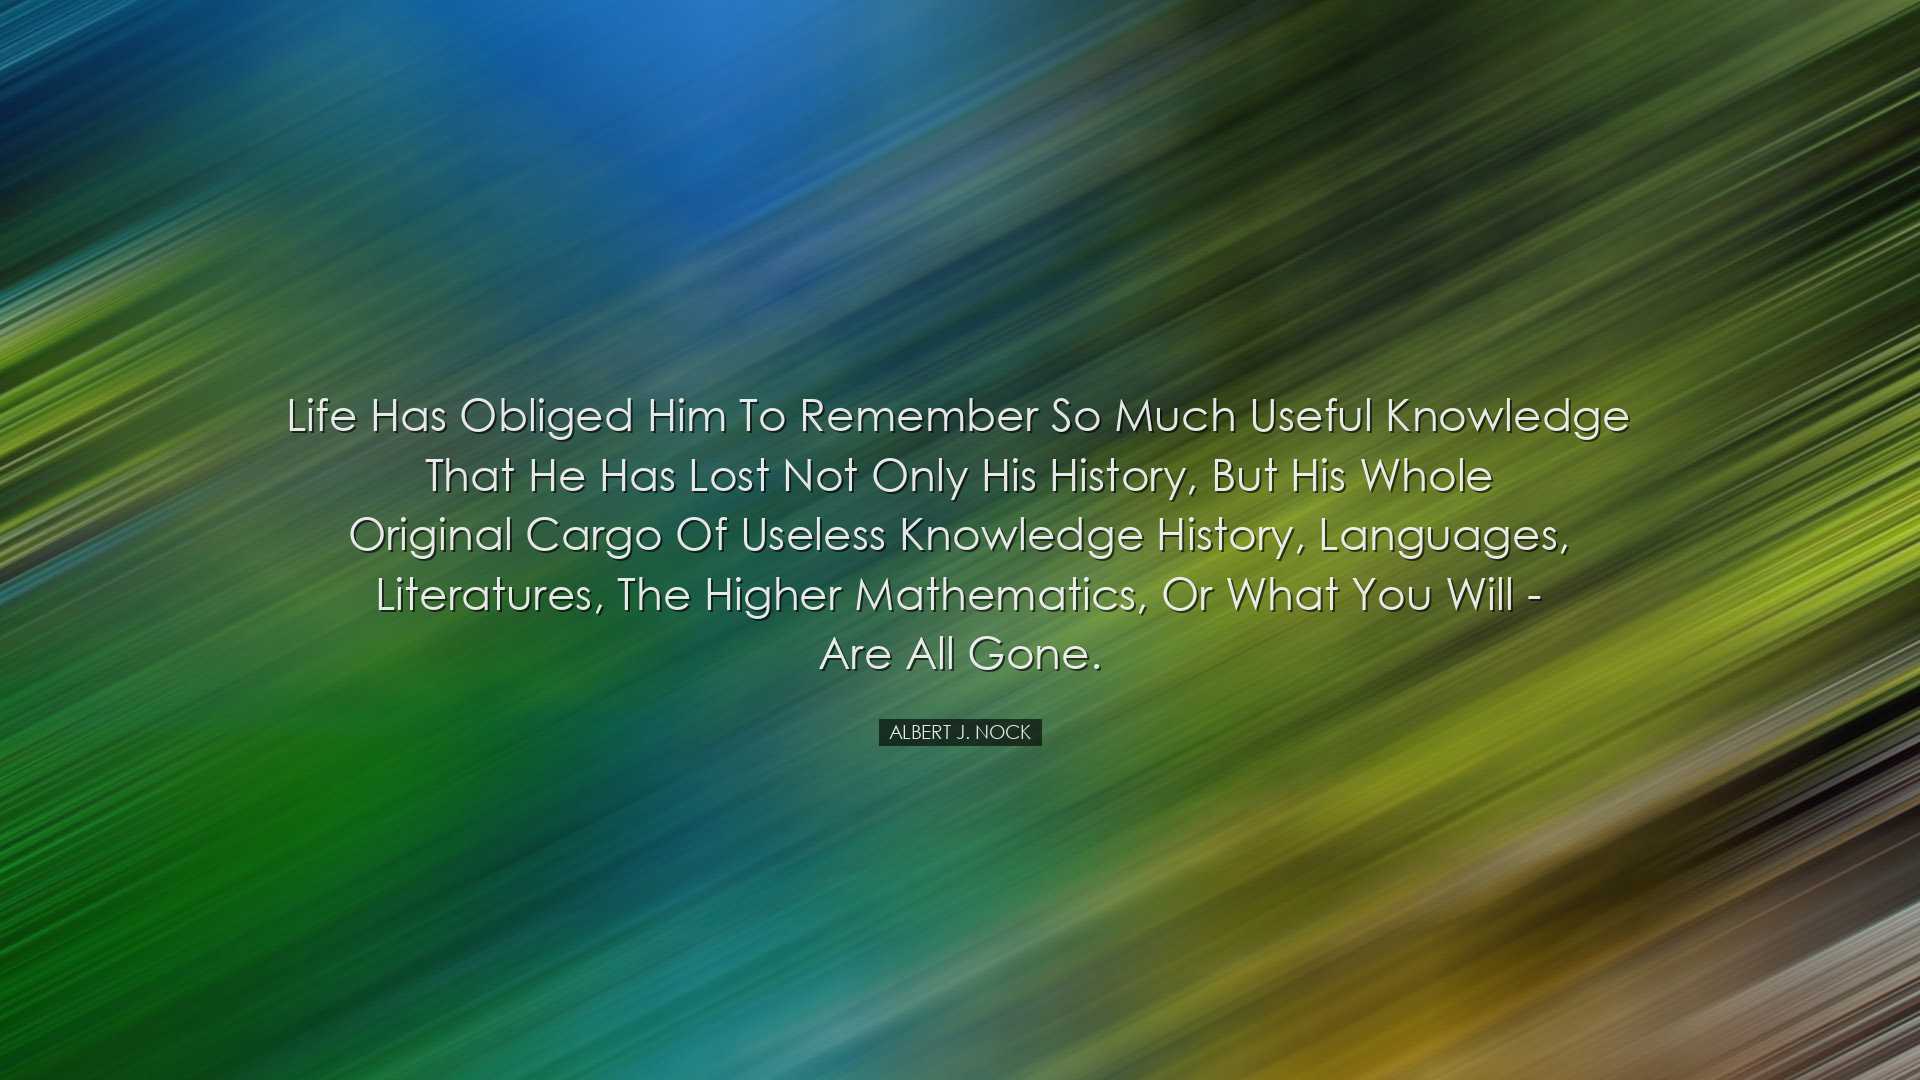 Life has obliged him to remember so much useful knowledge that he